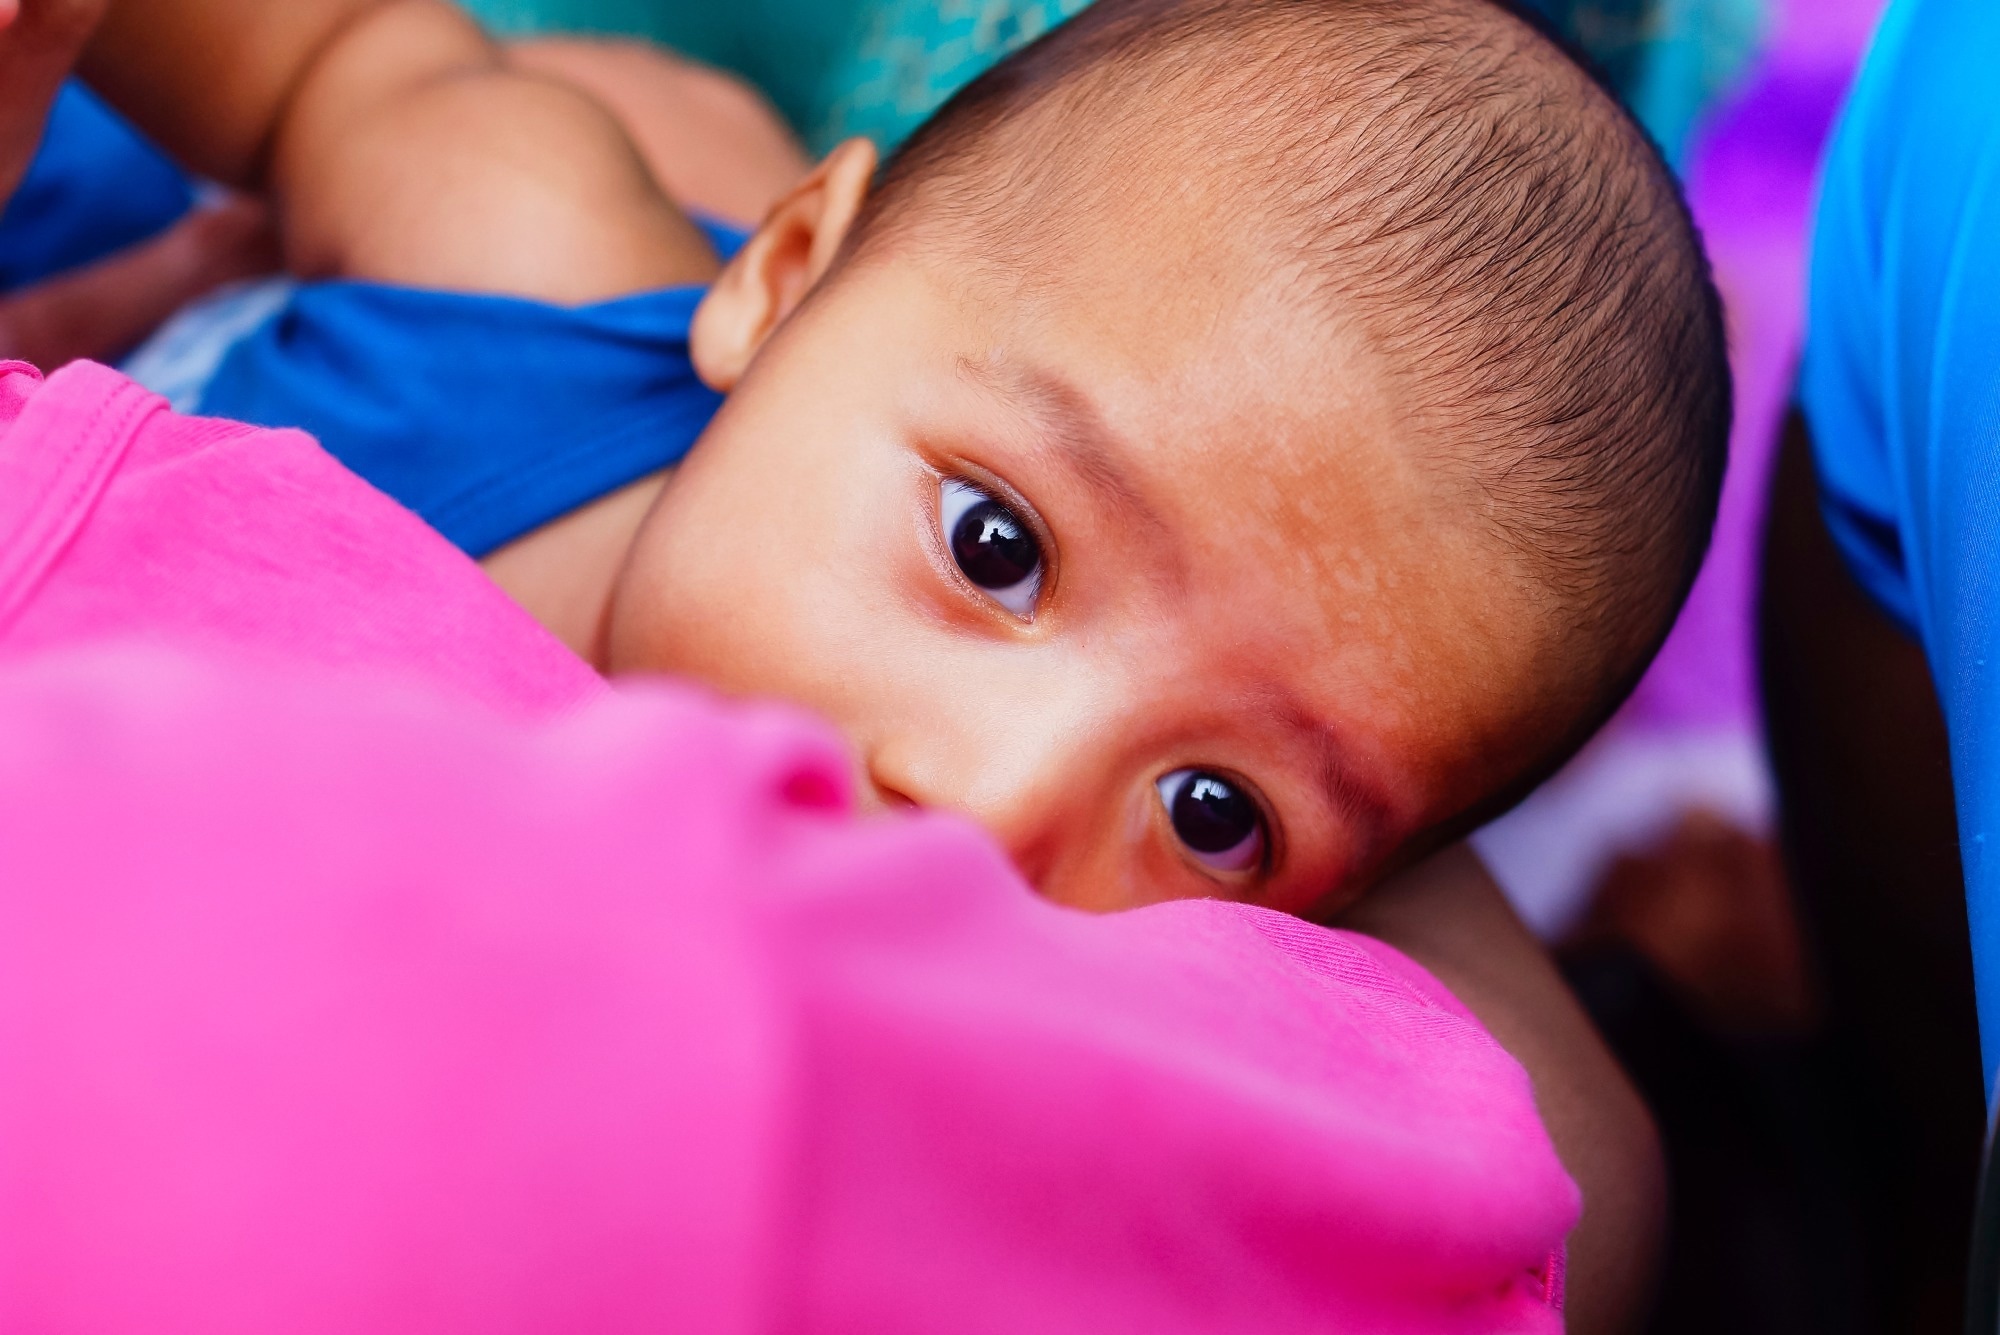 Inadequate breastfeeding practices linked to a tenth of childhood diseases